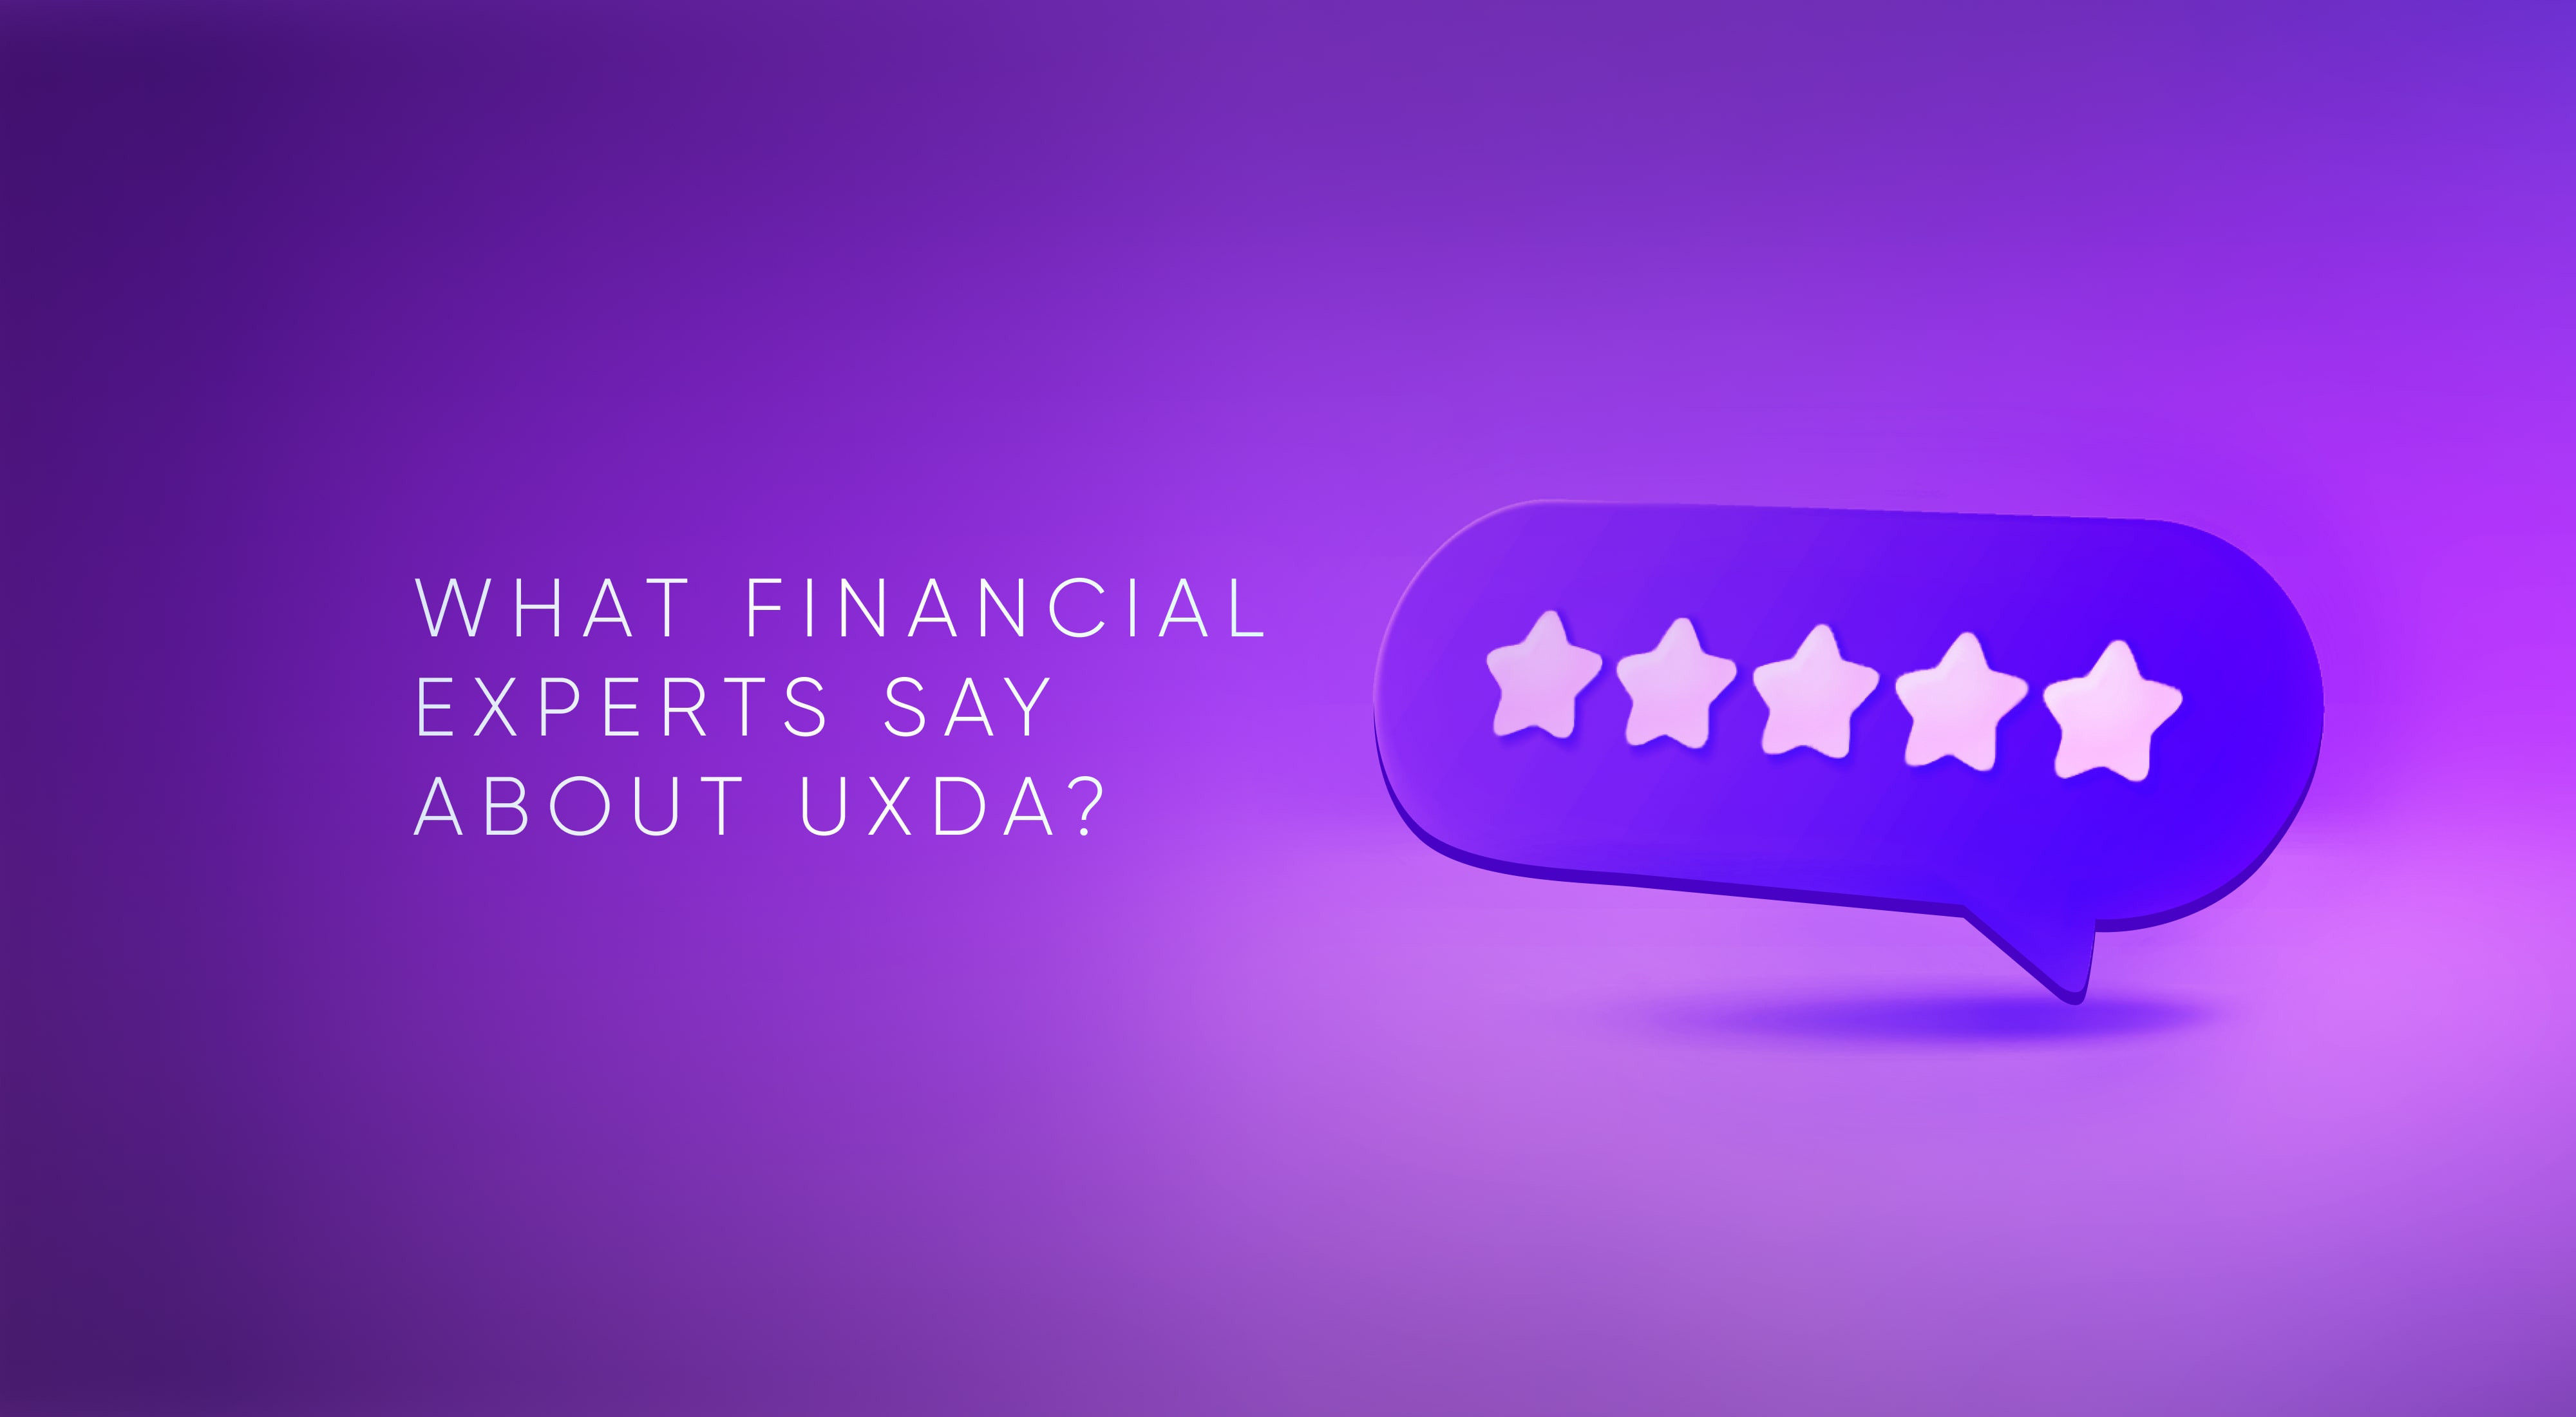 What Do the Financial Experts Say About UXDA's Work?